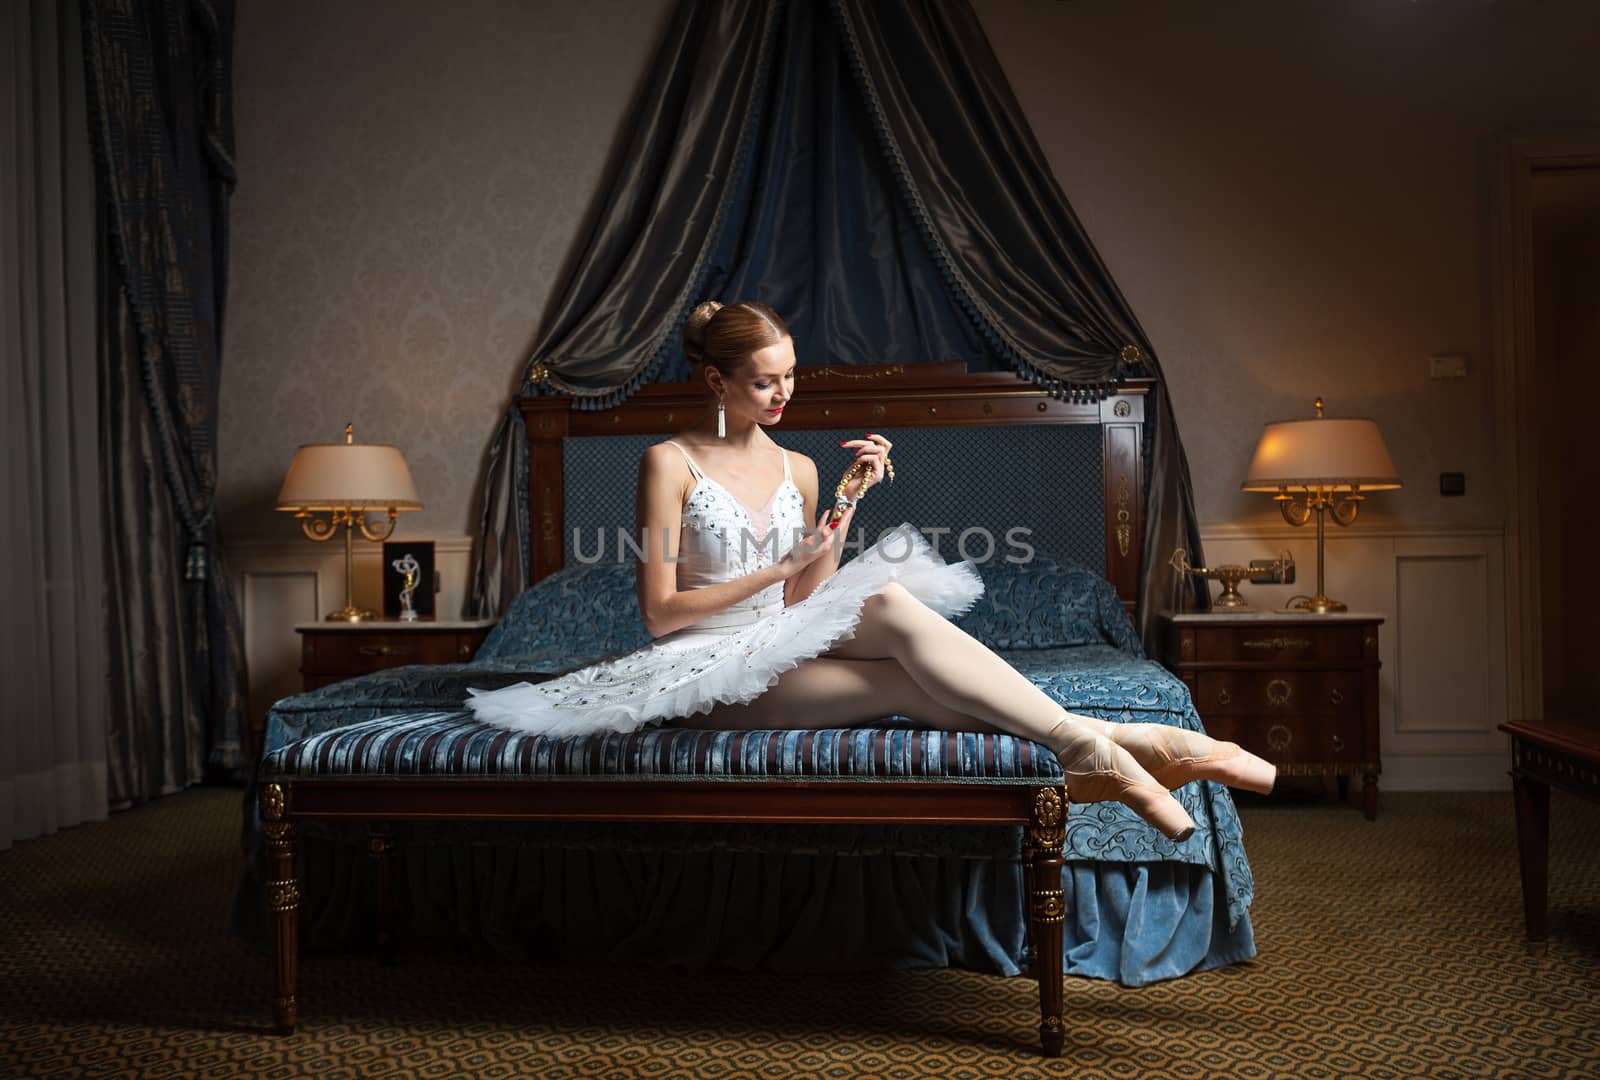 Ballet dancer in bedroom holding pearl necklace by photobac